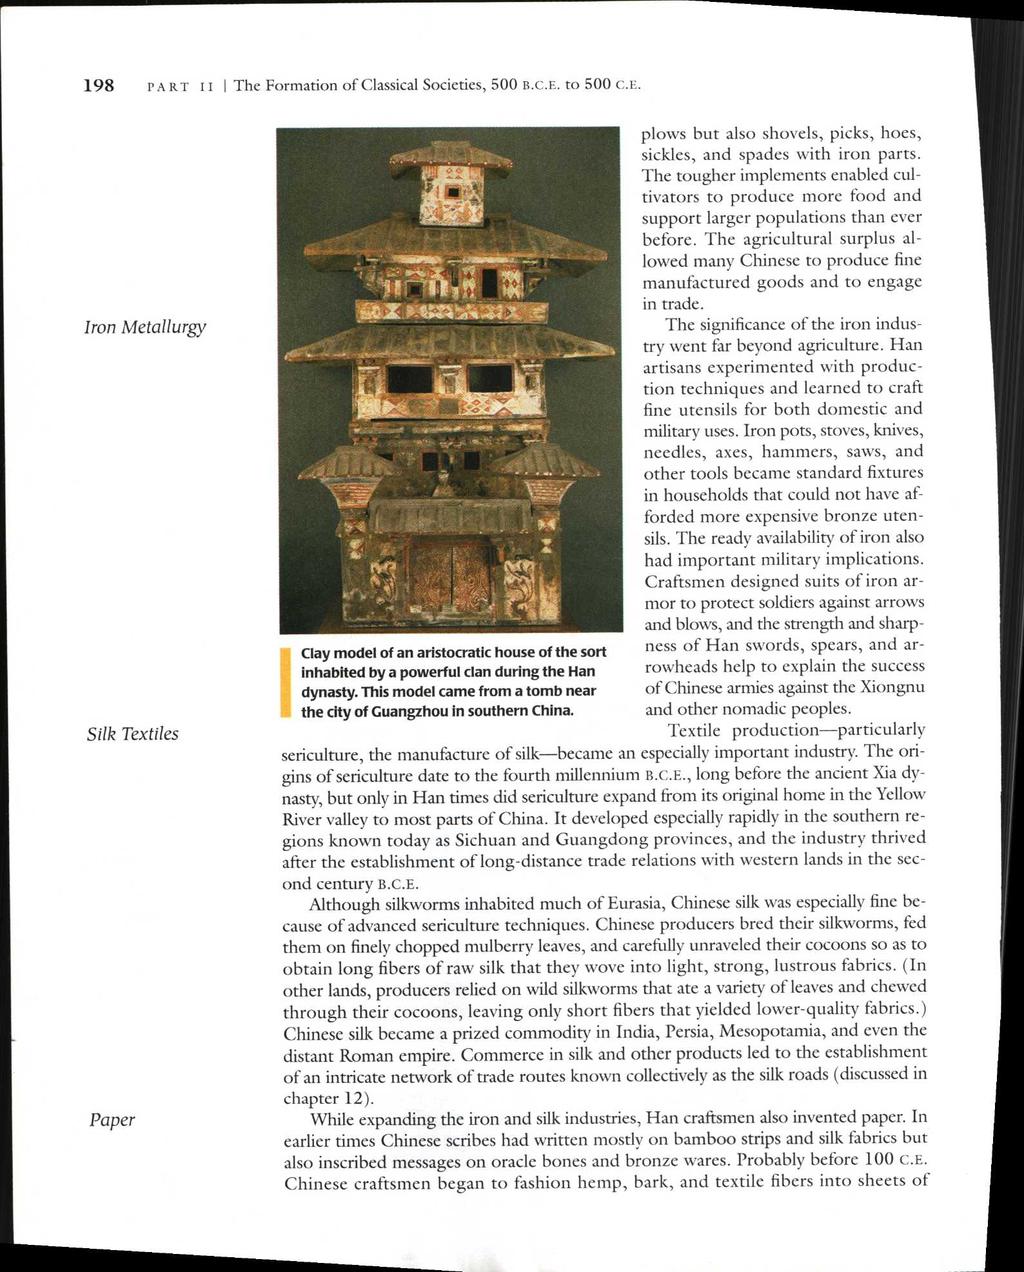 198 PART I I I The Formation of Classical Societies, 500 B.C.E. to 500 C.E. Iron Metallurgy Silk Textiles Paper Clay model of an aristocratic house of the sort inhabited by a powerful clan during the Han dynasty.